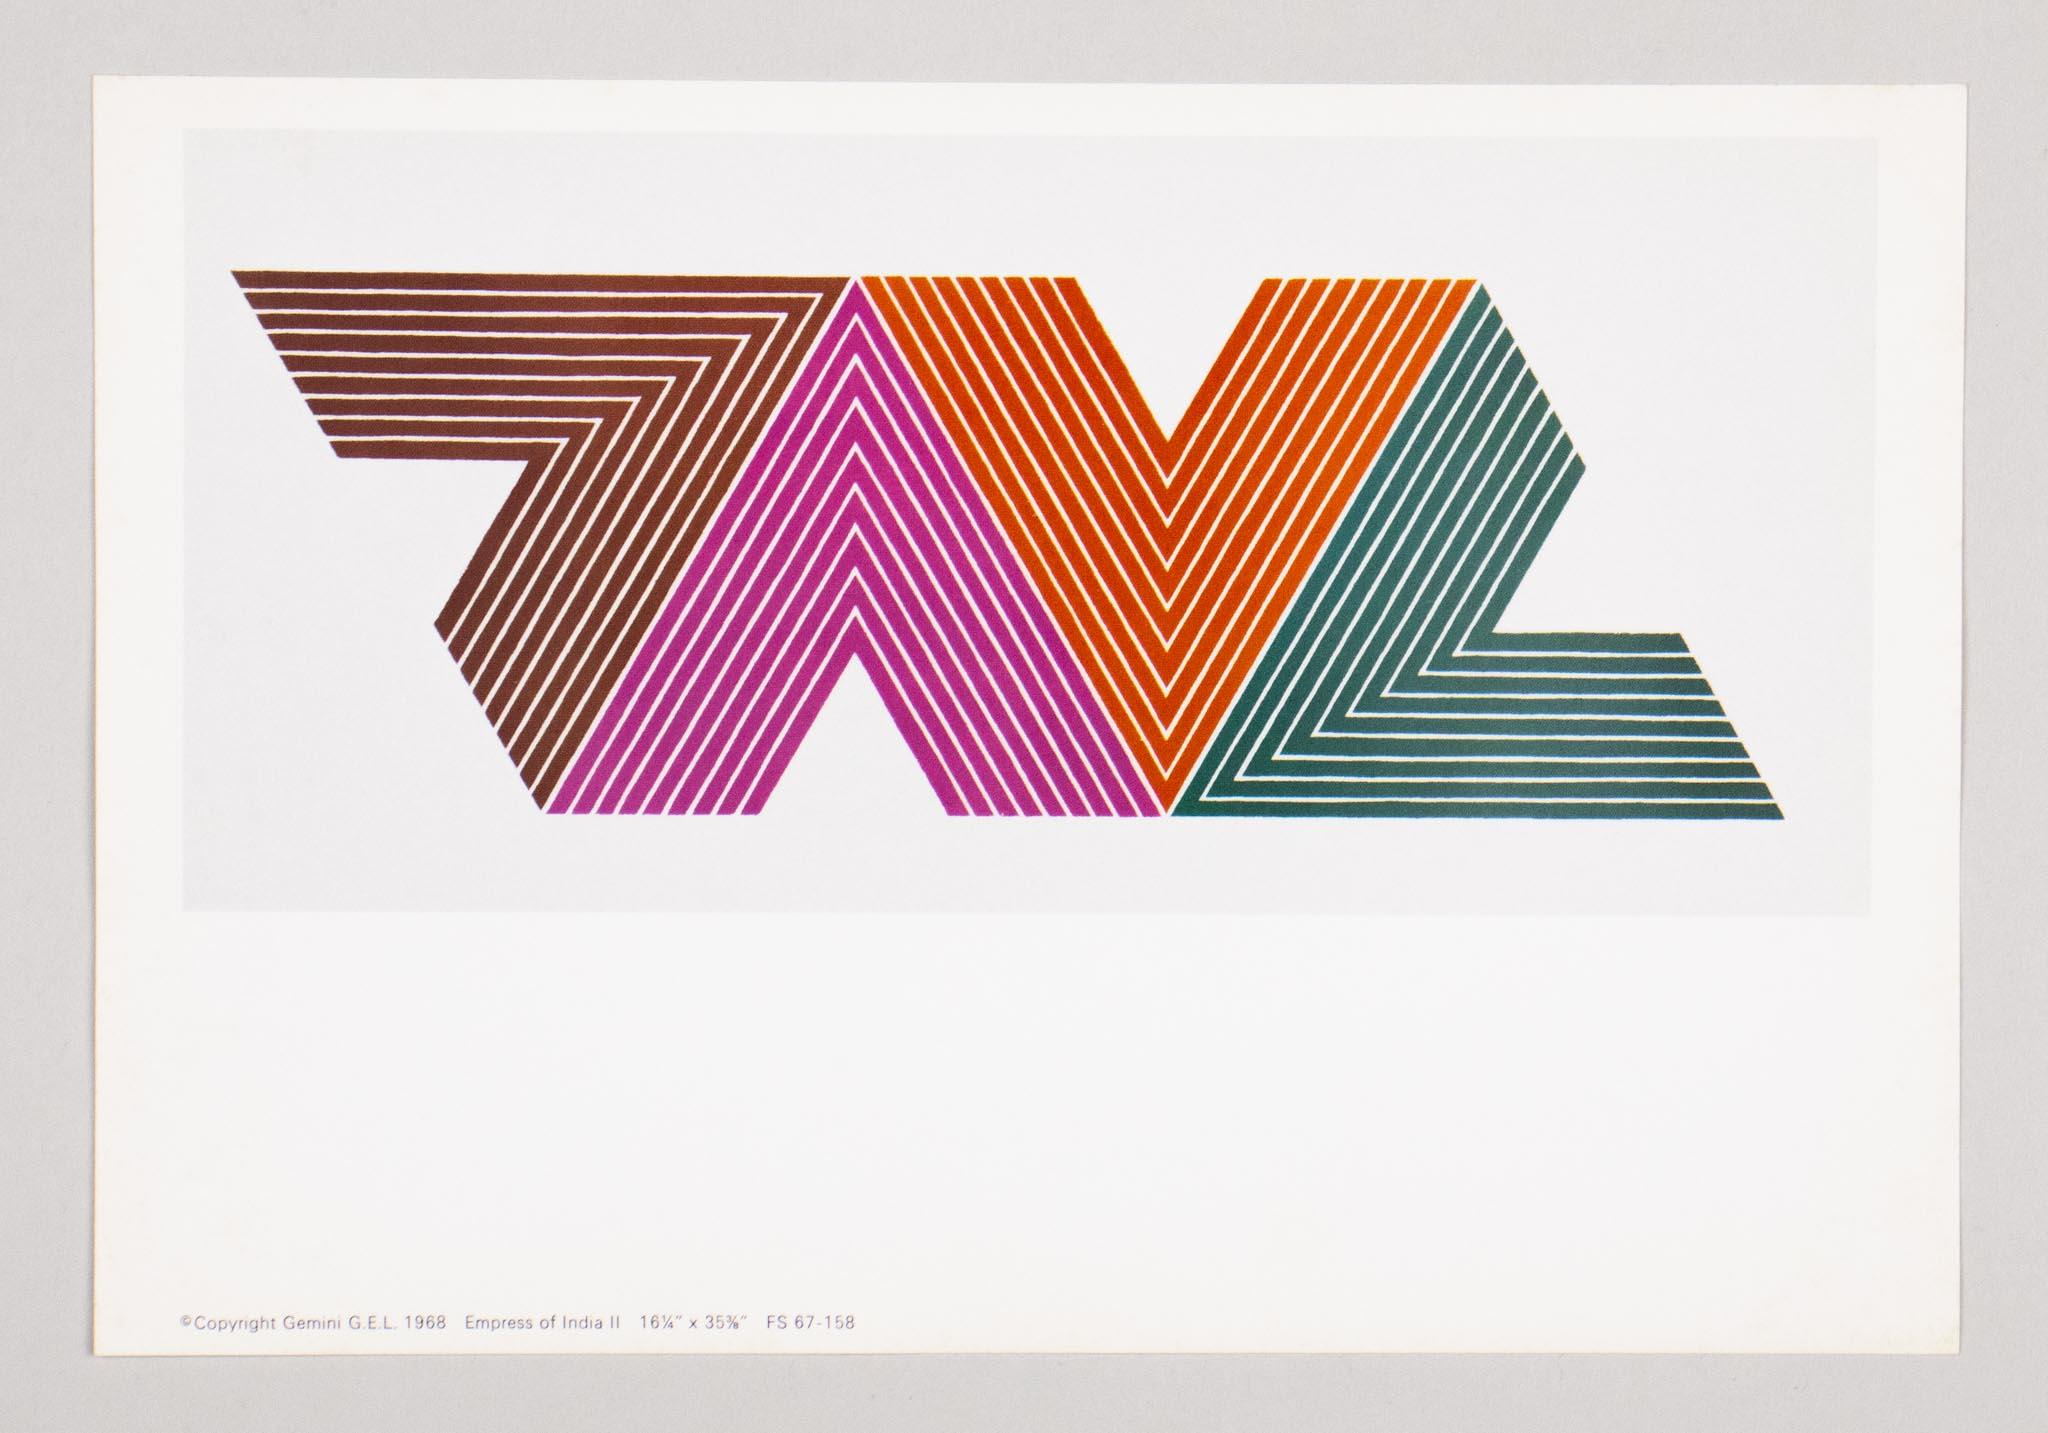 Frank Stella – The V Series
Los Angeles: Gemini G.E.L., 1968

Absolutely rare promotional prospectus – a scarce collectible and a must-have for every Pop Art enthusiast!

Catalogue of eight prints created by Frank Stella at the Gemini G.E.L. studios